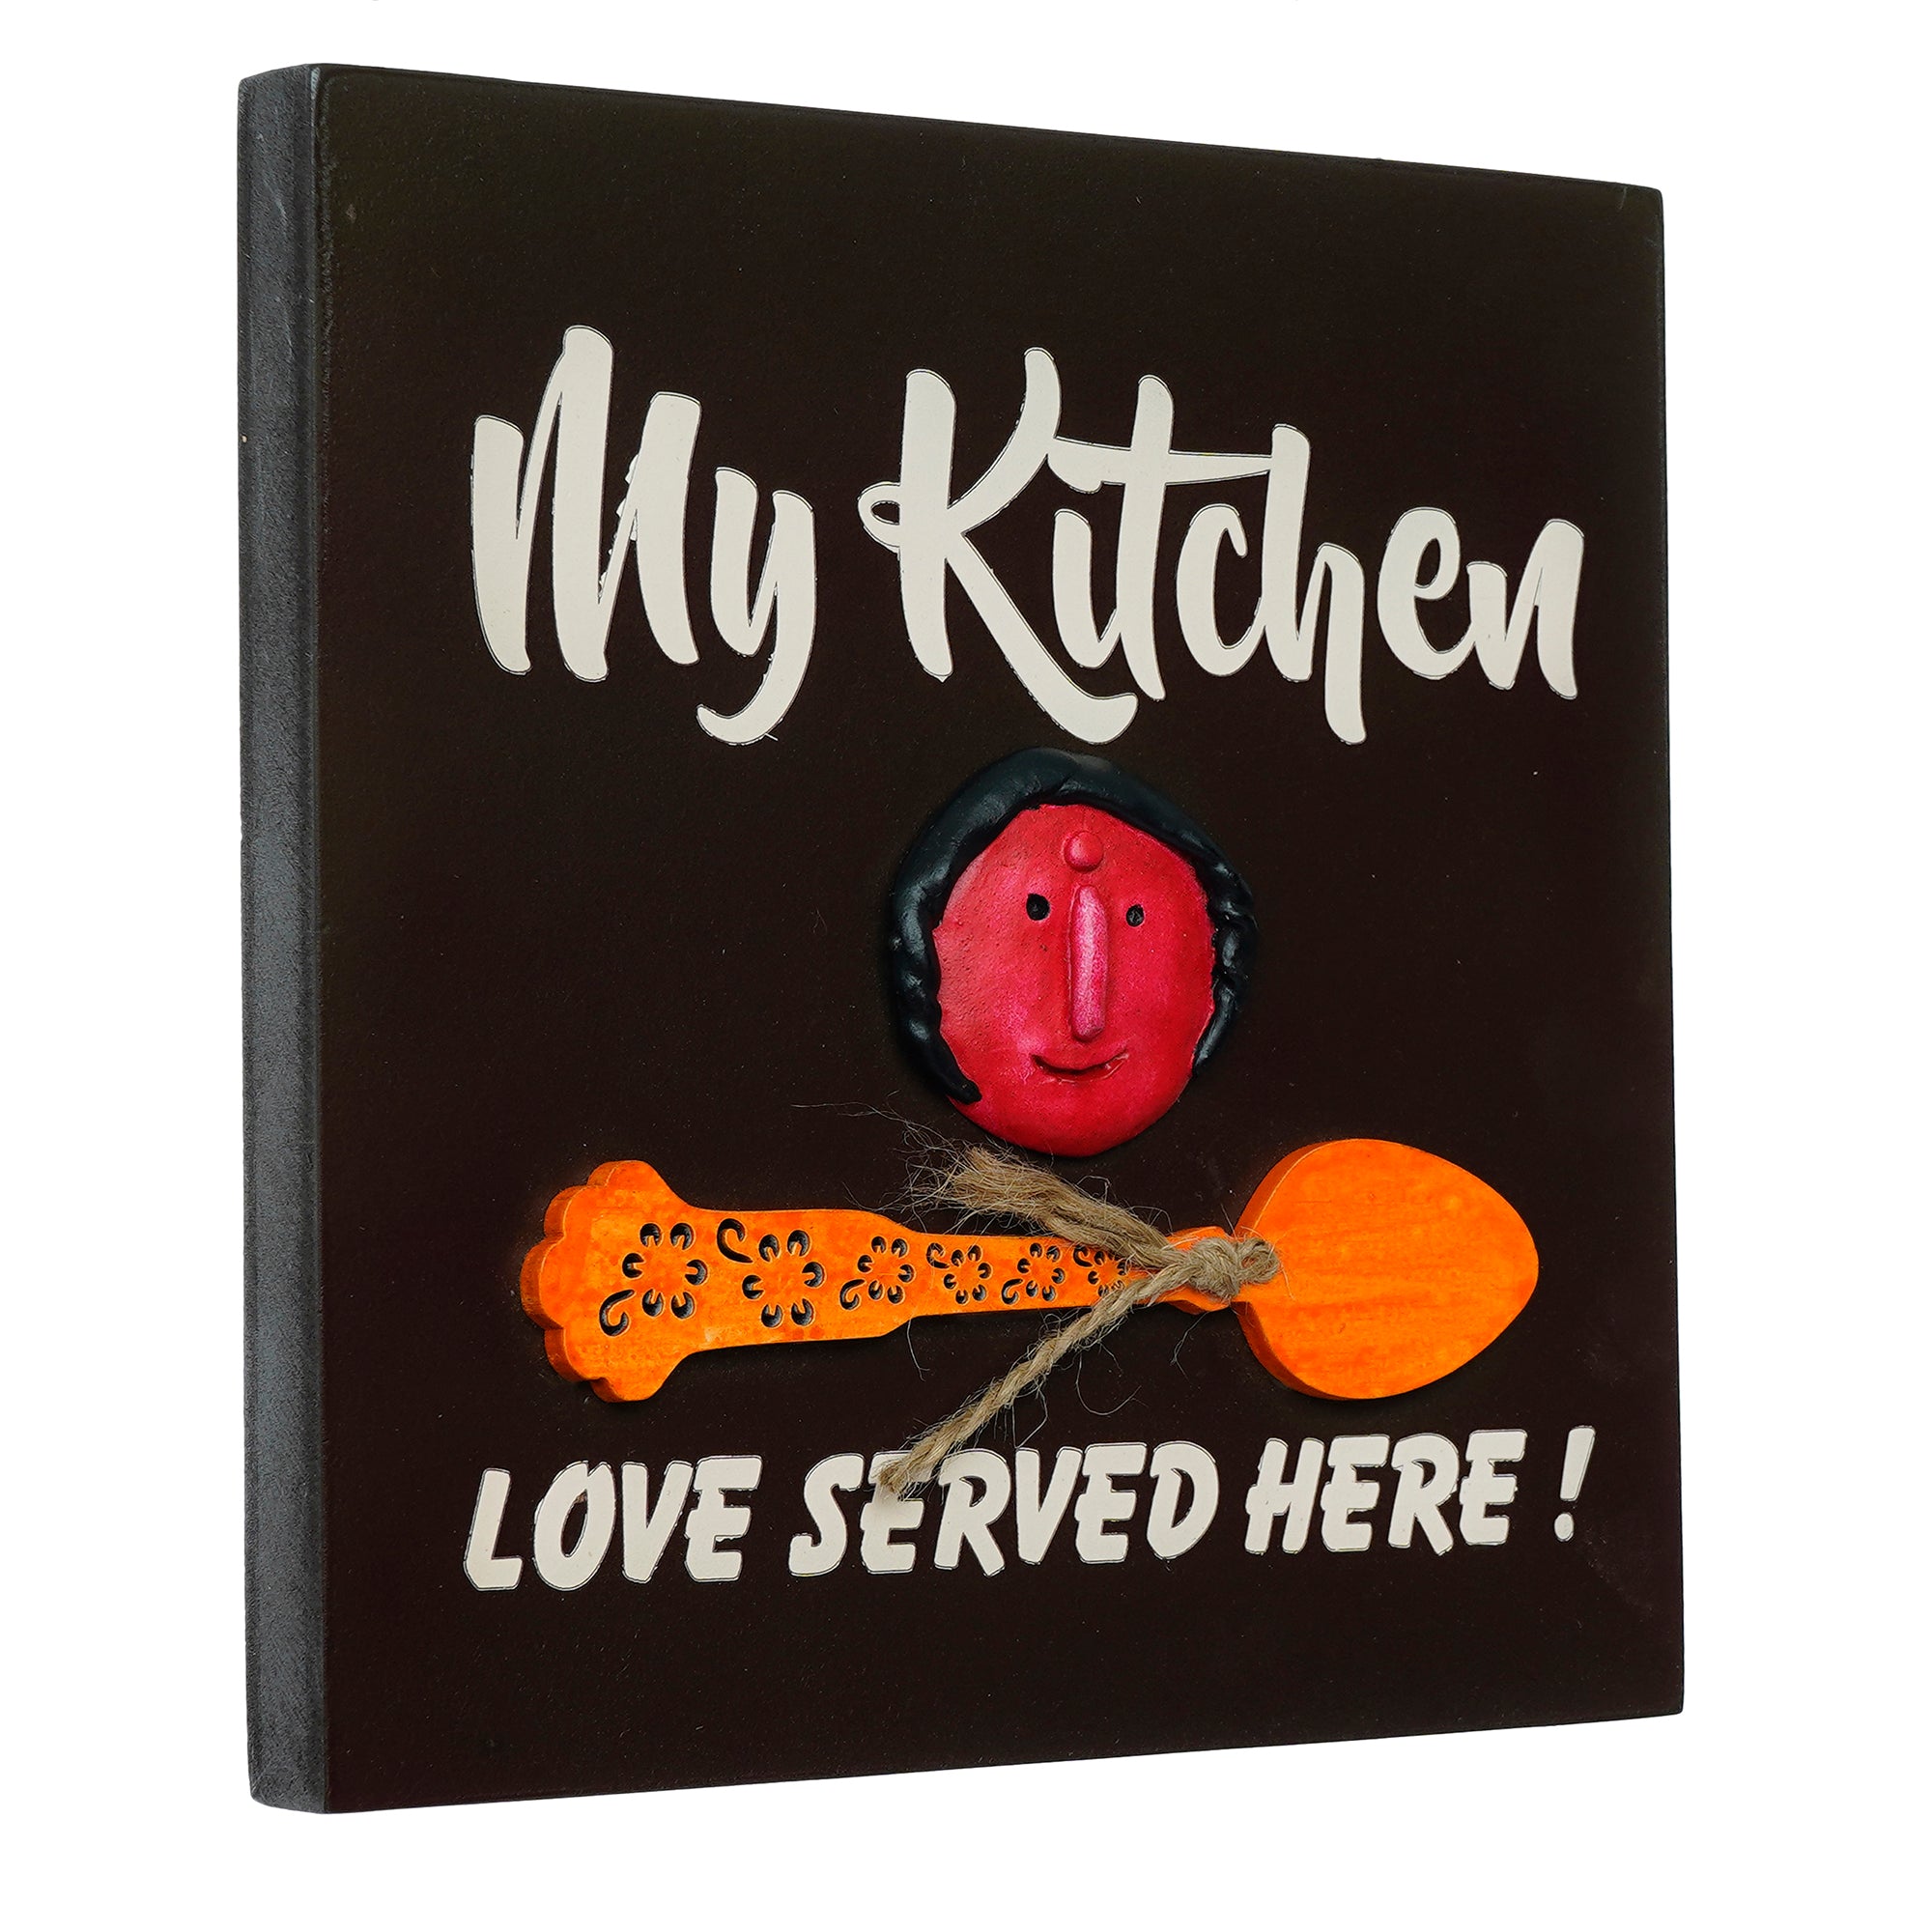 "My Kitchen, Love Served Here!" Mother's Love Theme Decorative Wooden Wall Hanging 4